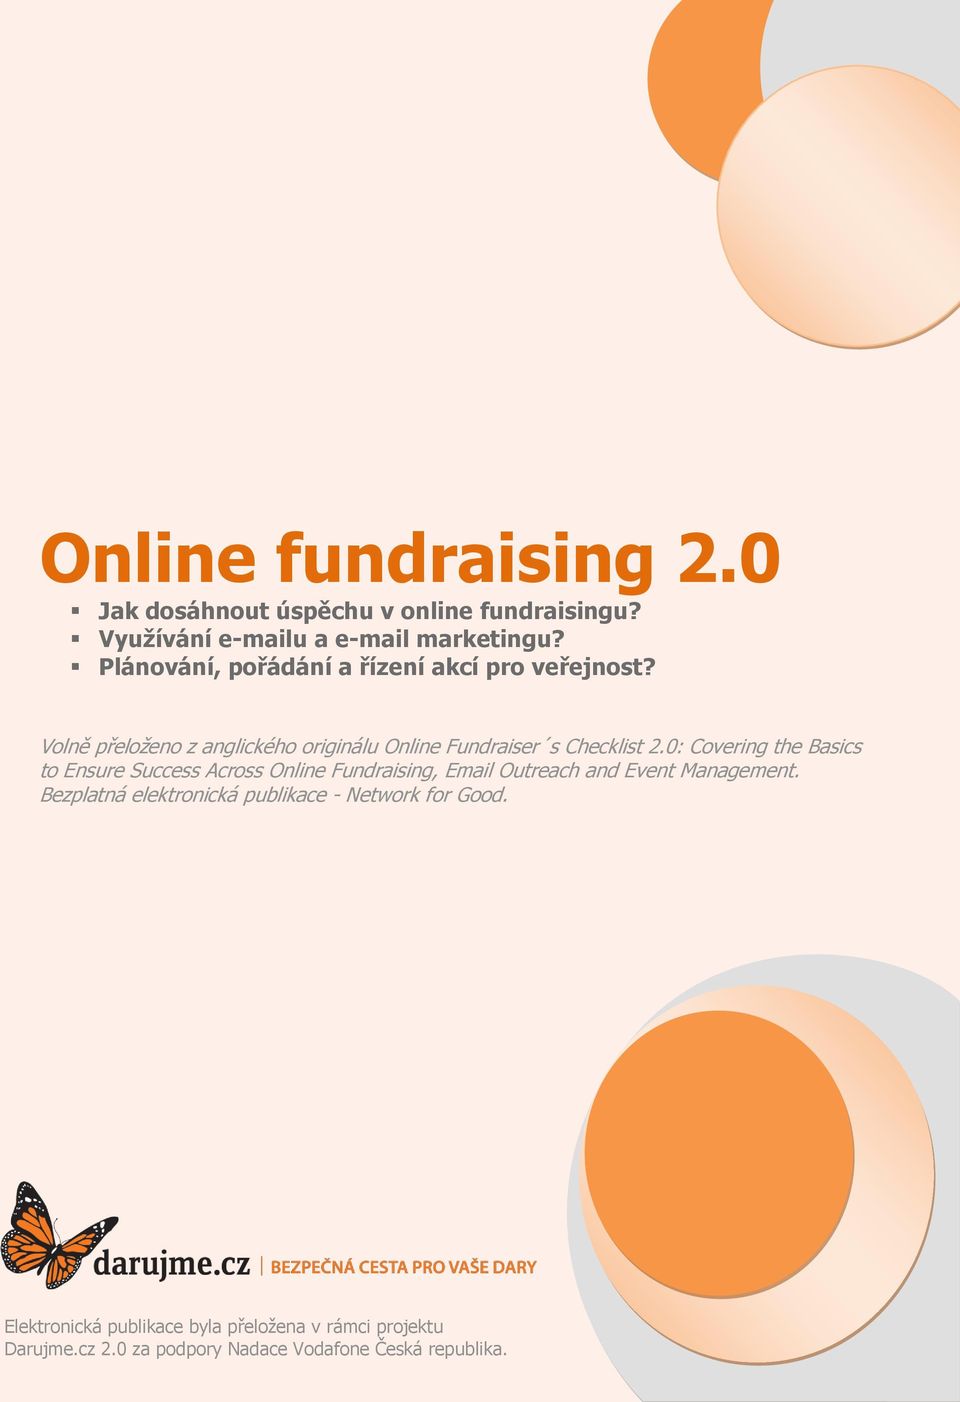 0: Covering the Basics to Ensure Success Across Online Fundraising, Email Outreach and Event Management.